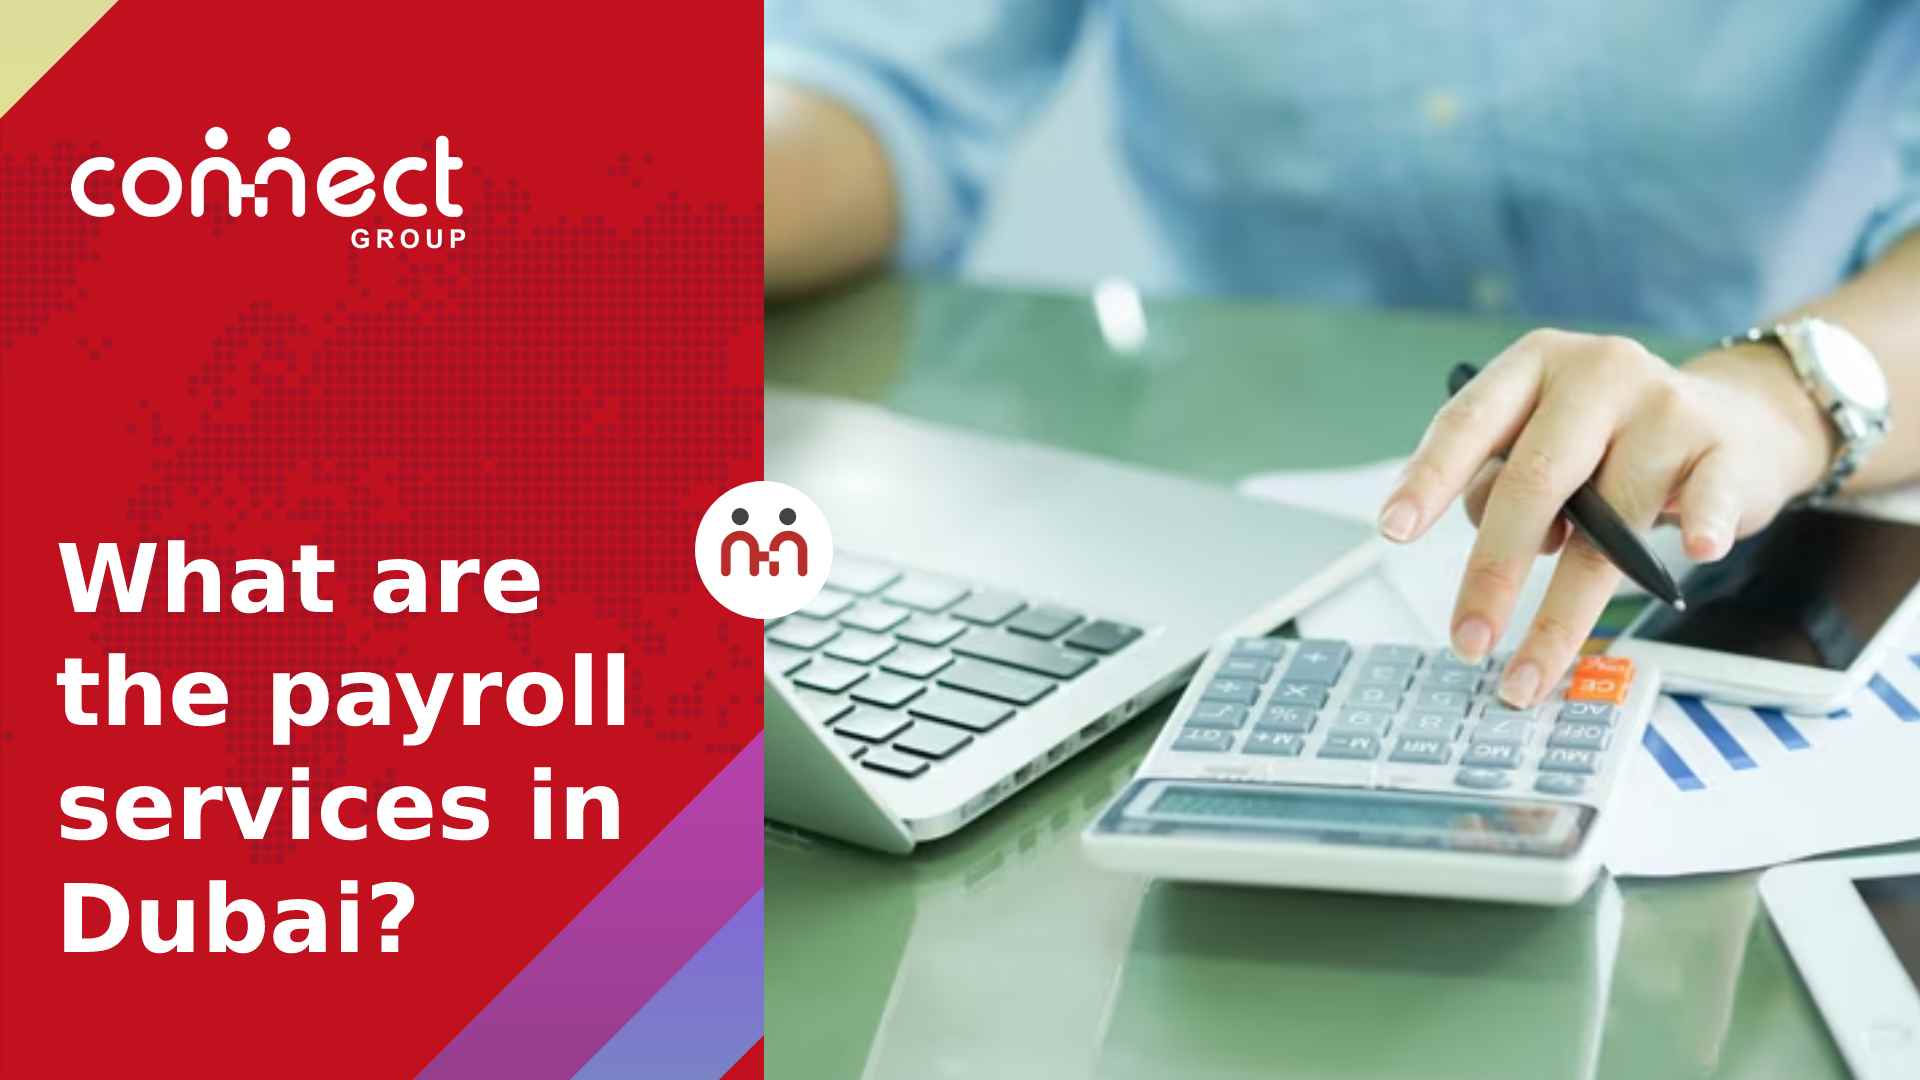 What are the payroll services in Dubai?